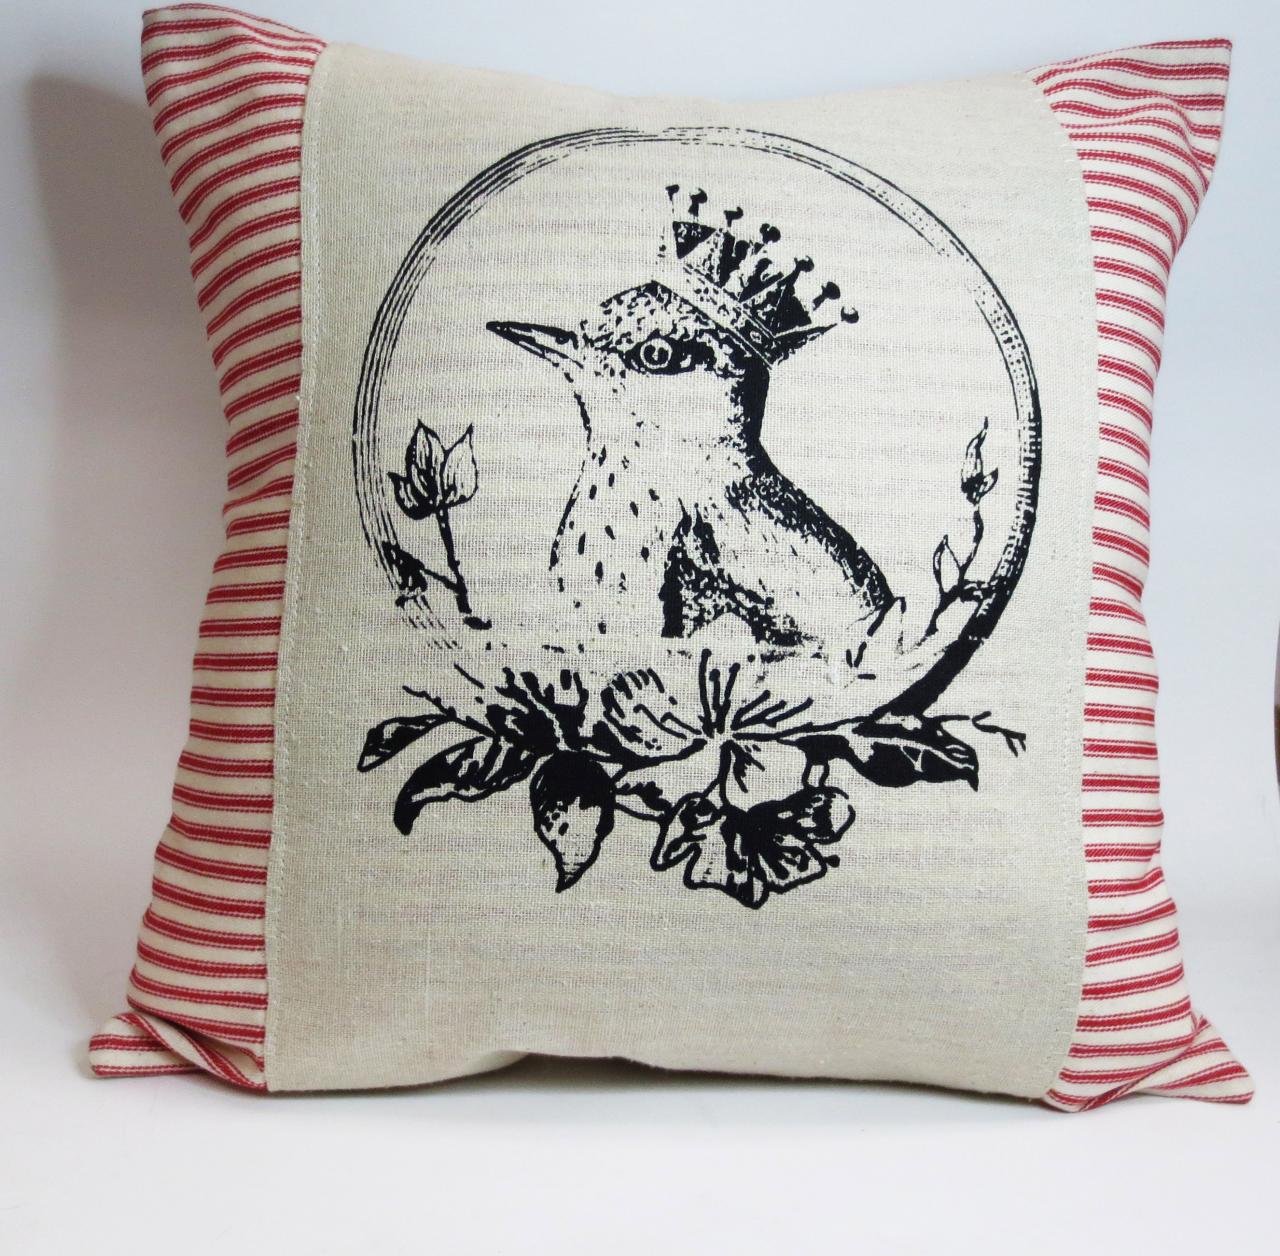 Decorative Throw Pillow Cushion Cover With Black Bird In A Crown Screen Printed In Black